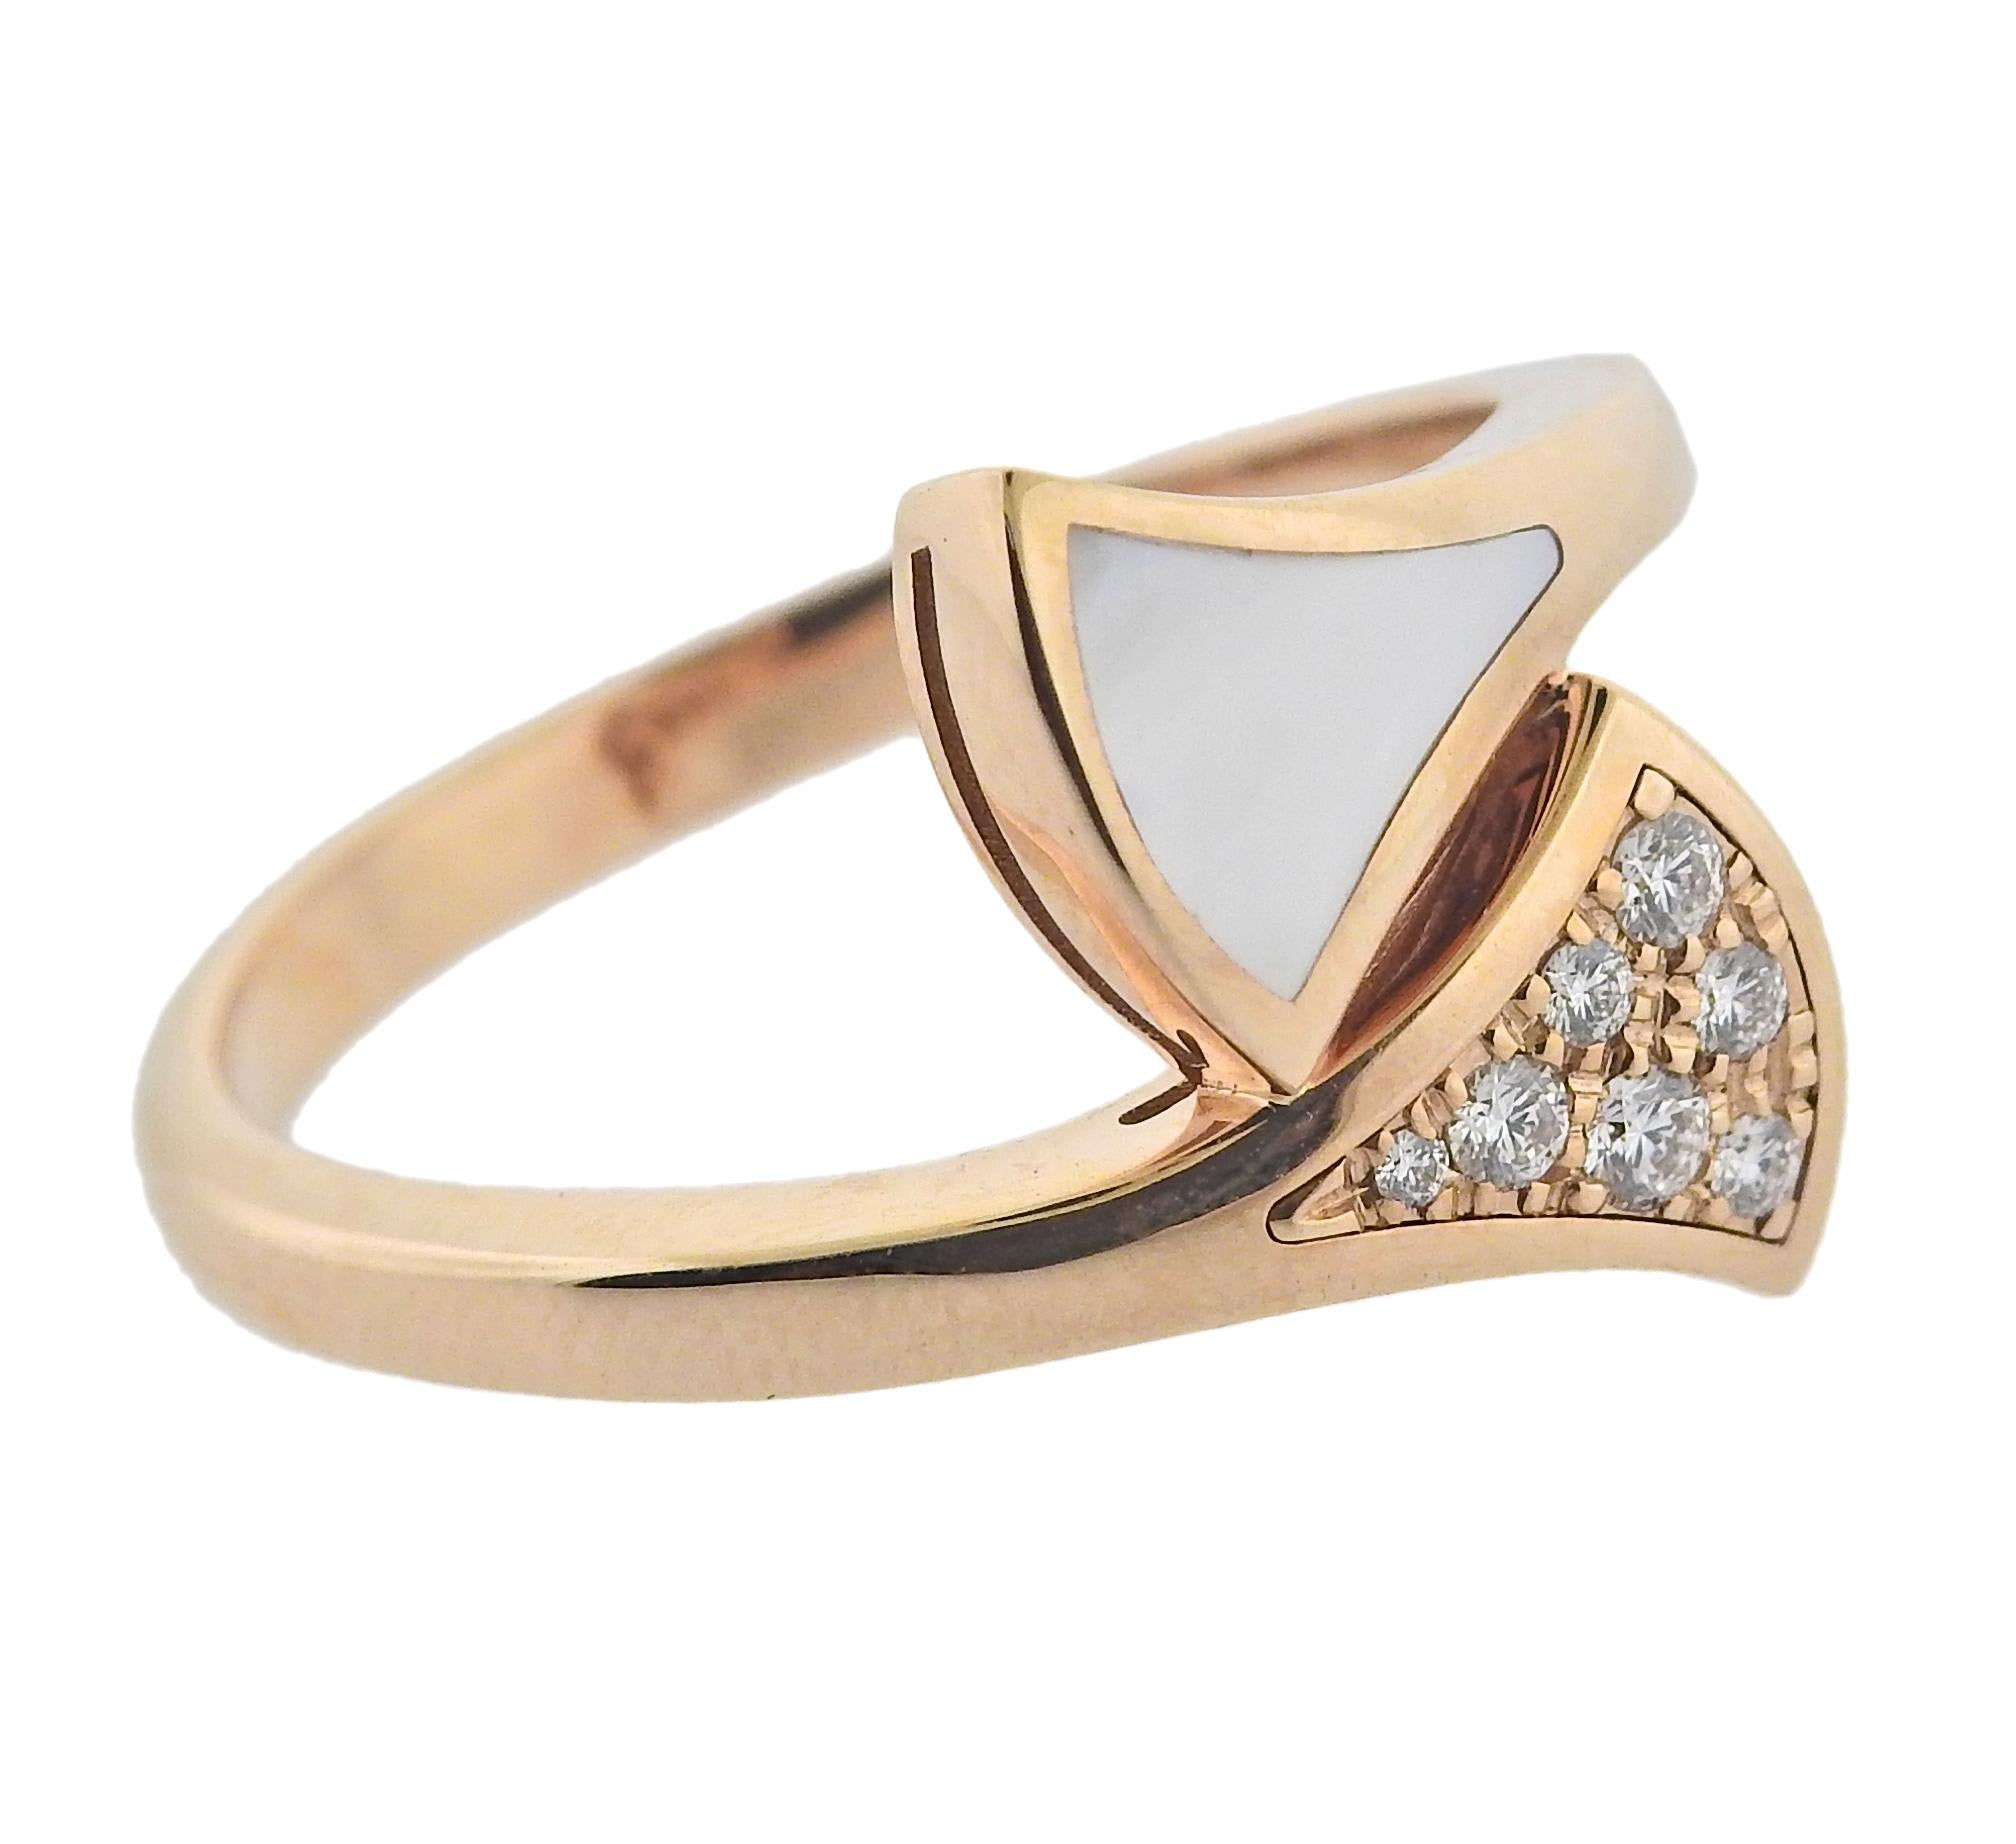 18k rose gold Bvlgari Diva's Dream ring, with 0.20ctw G/VS diamonds and mother of pearl. Retail $2170. Comes with COA and box. Ring size 6, top is 14mm wide. Marked Bvlgari, made in Italy, Italian mark, 750, Serial number. Weight 4.1 grams